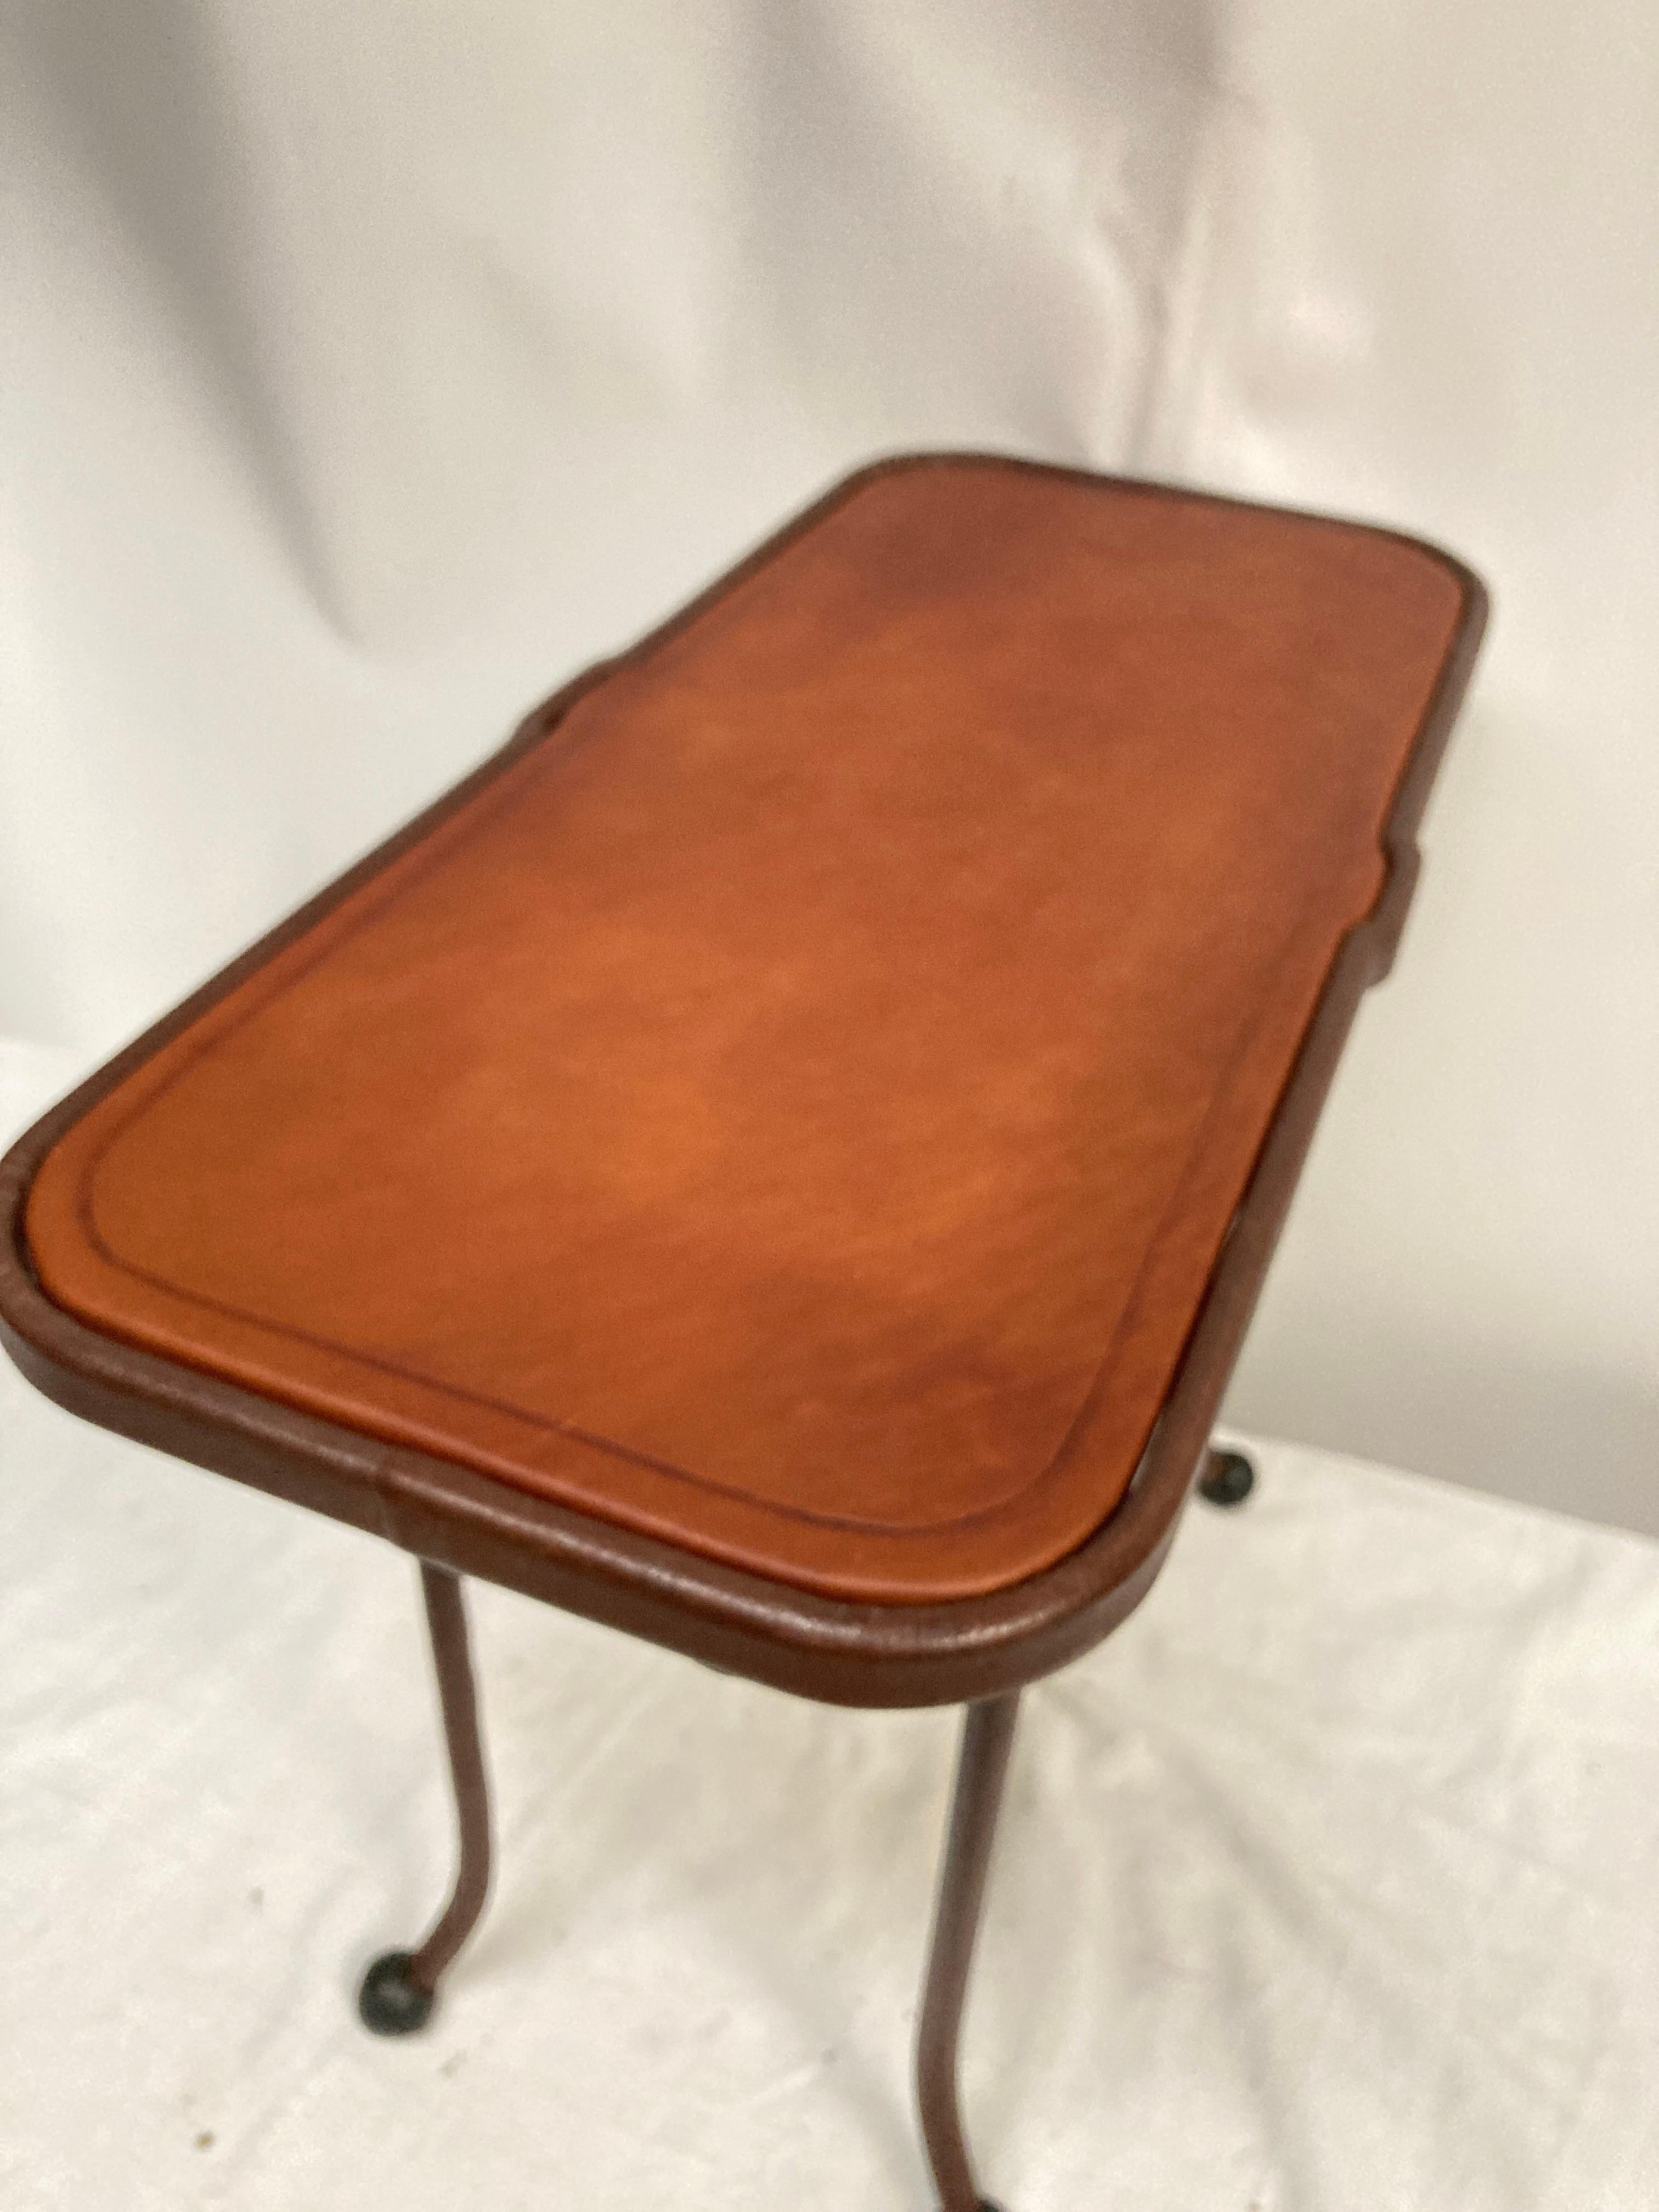 1950's Stitched leather side table by Jacques Adnet For Sale 3